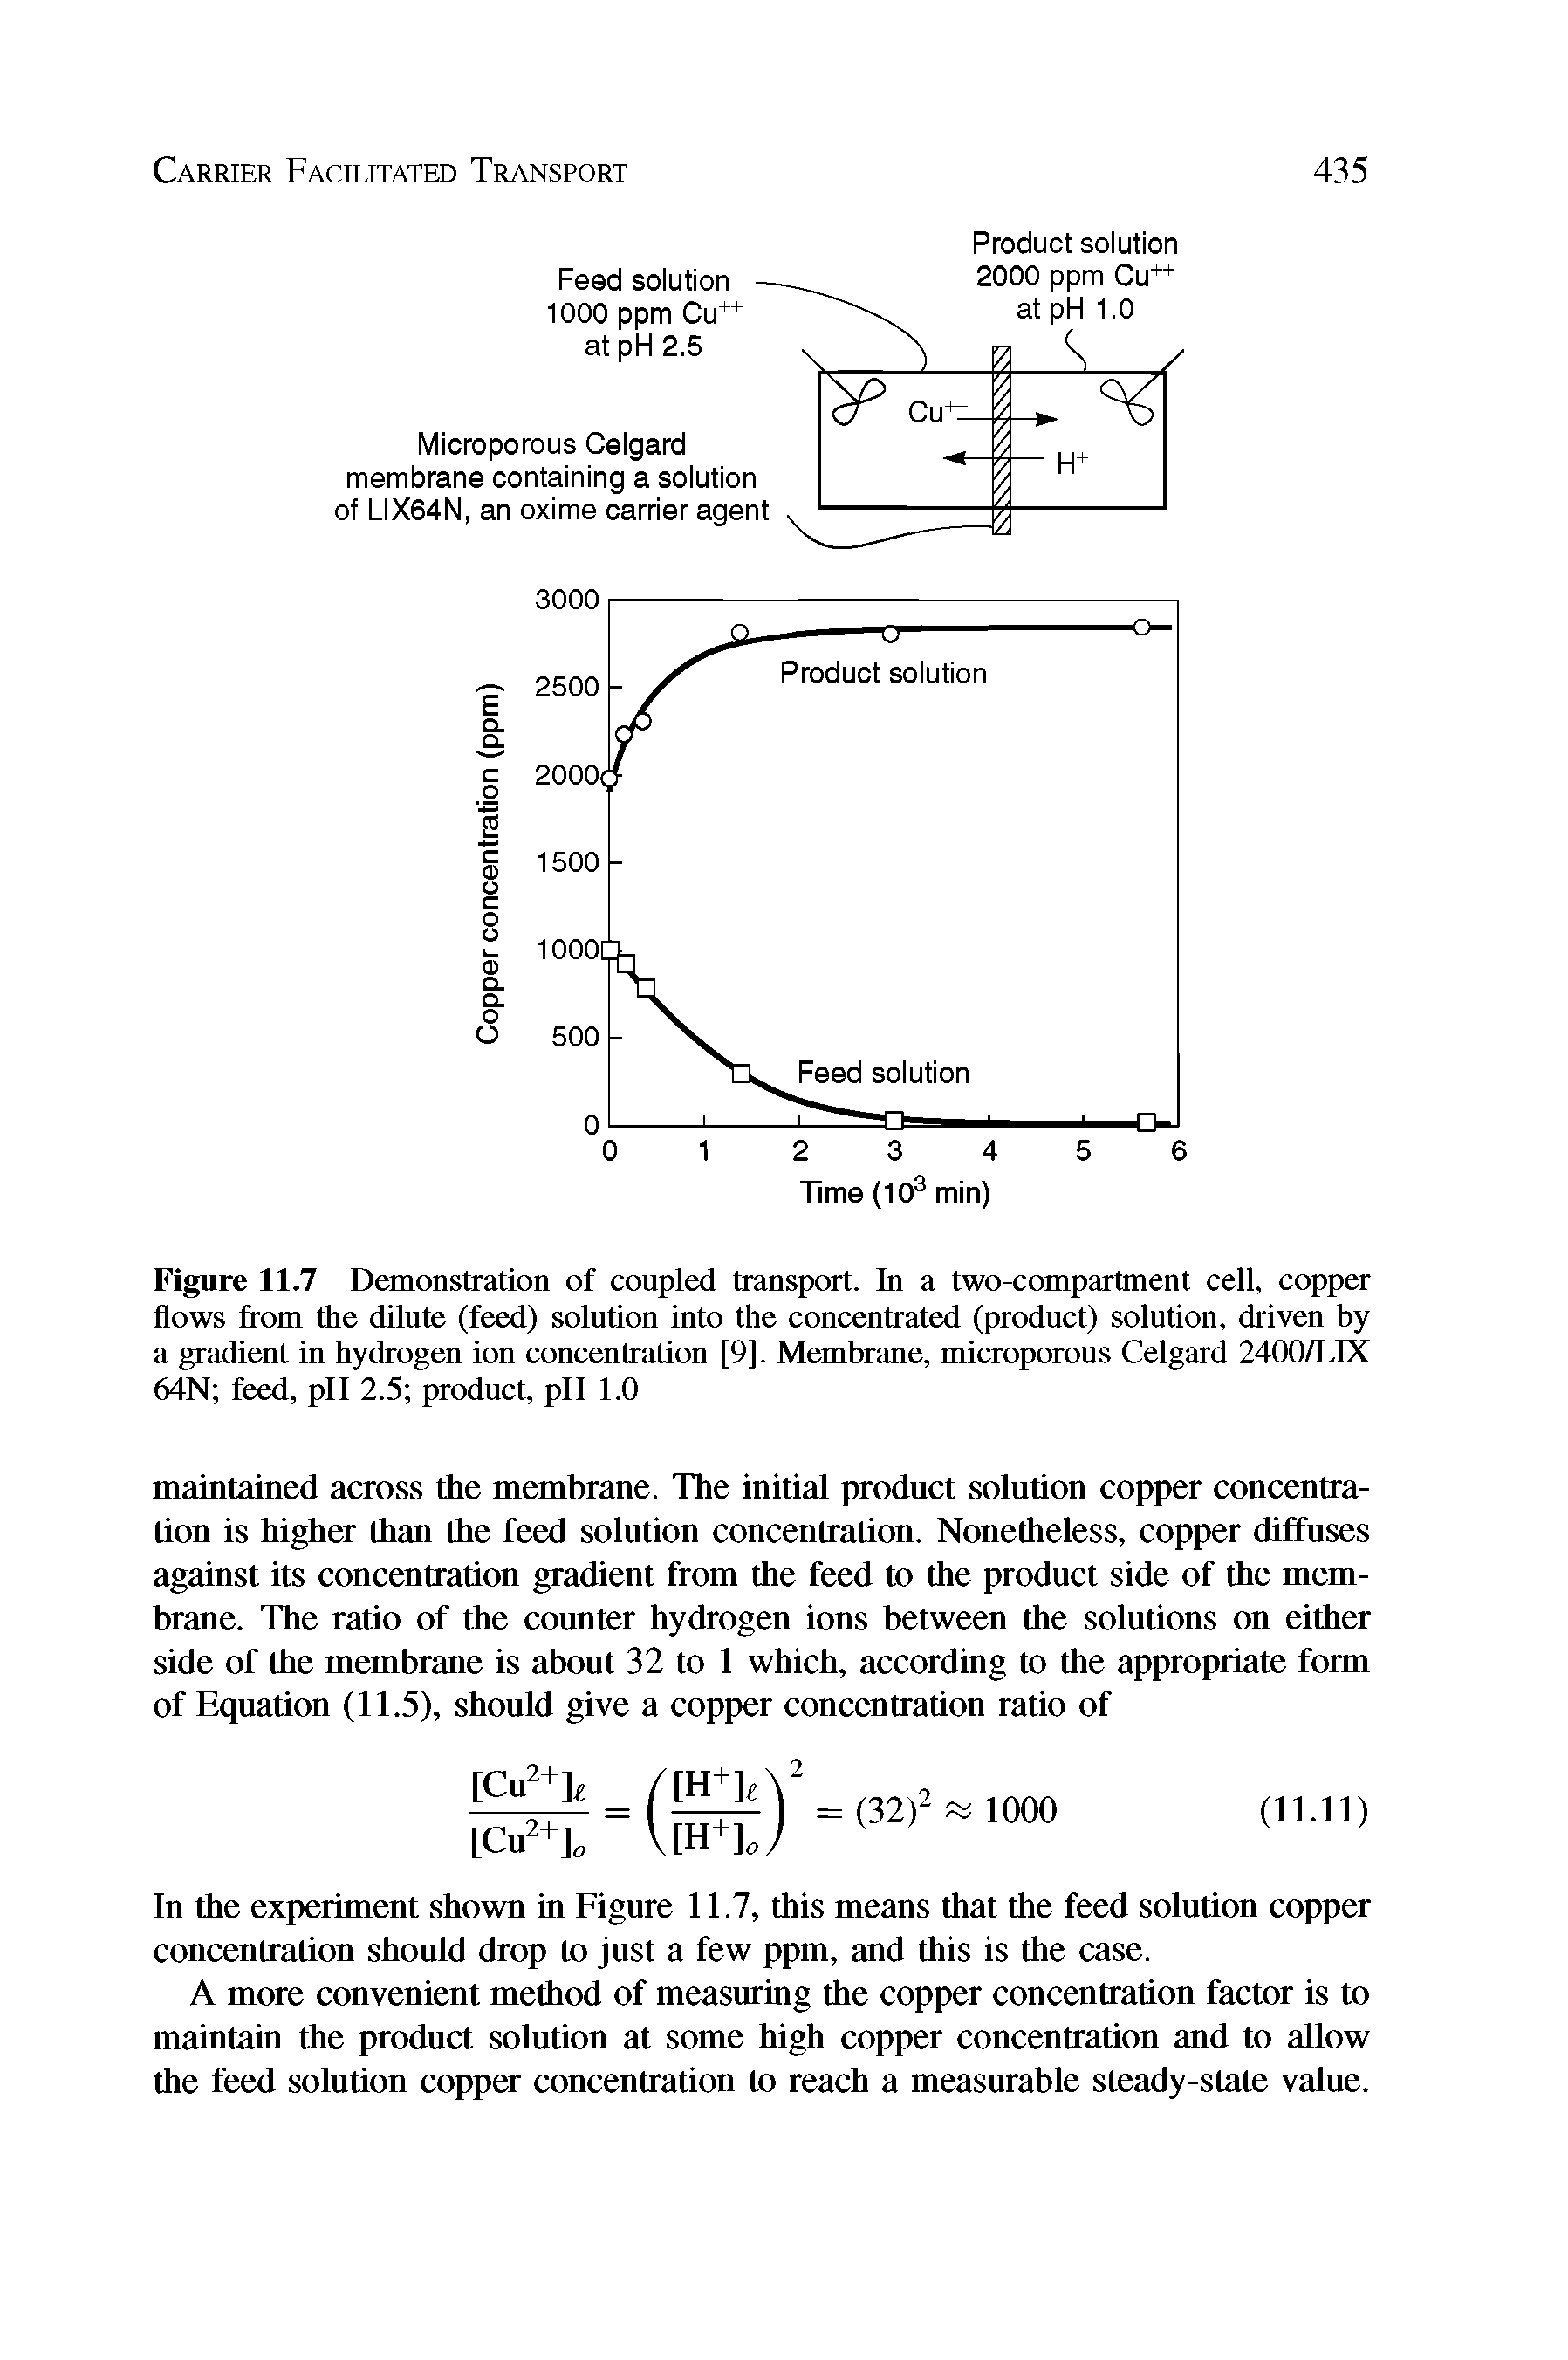 Figure 11.7 Demonstration of coupled transport. In a two-compartment cell, copper flows from the dilute (feed) solution into the concentrated (product) solution, driven by a gradient in hydrogen ion concentration [9], Membrane, microporous Celgard 2400/LIX 64N feed, pH 2.5 product, pH 1.0...